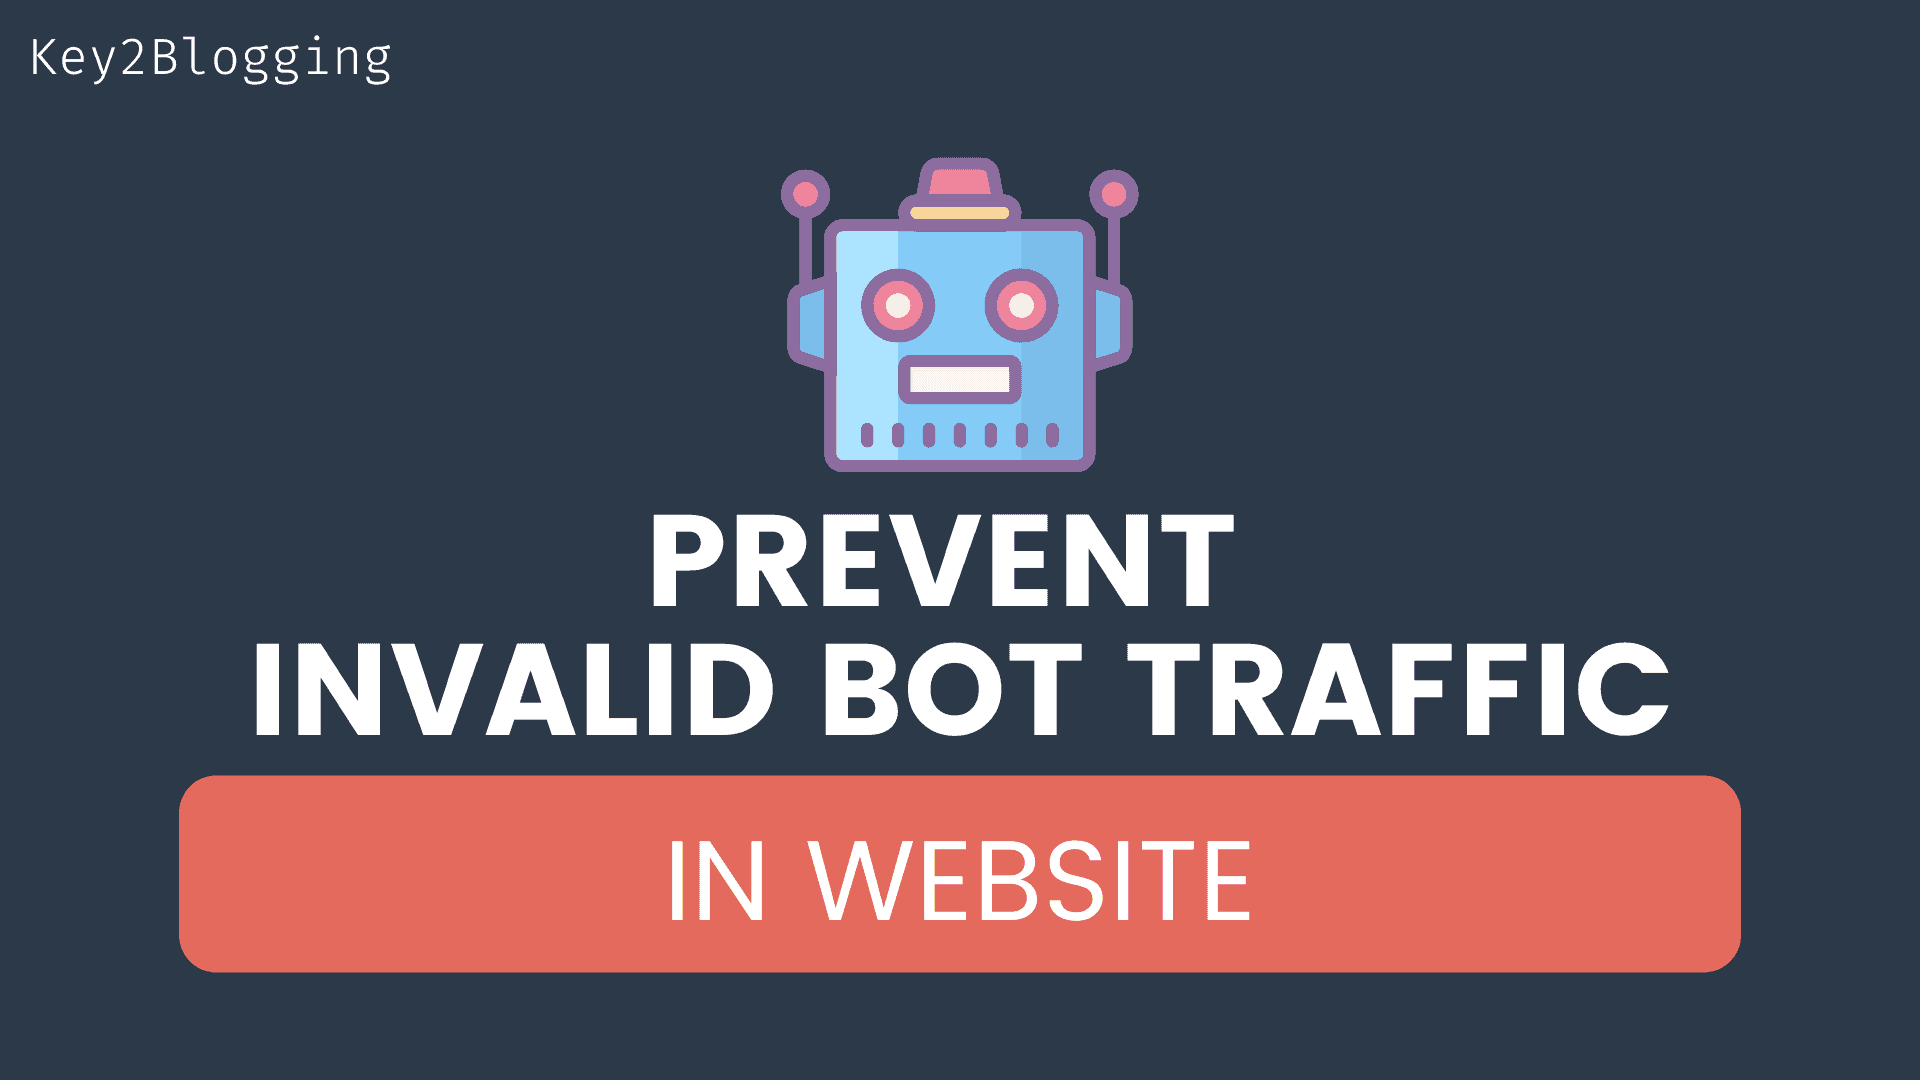 How to prevent invalid traffic in website